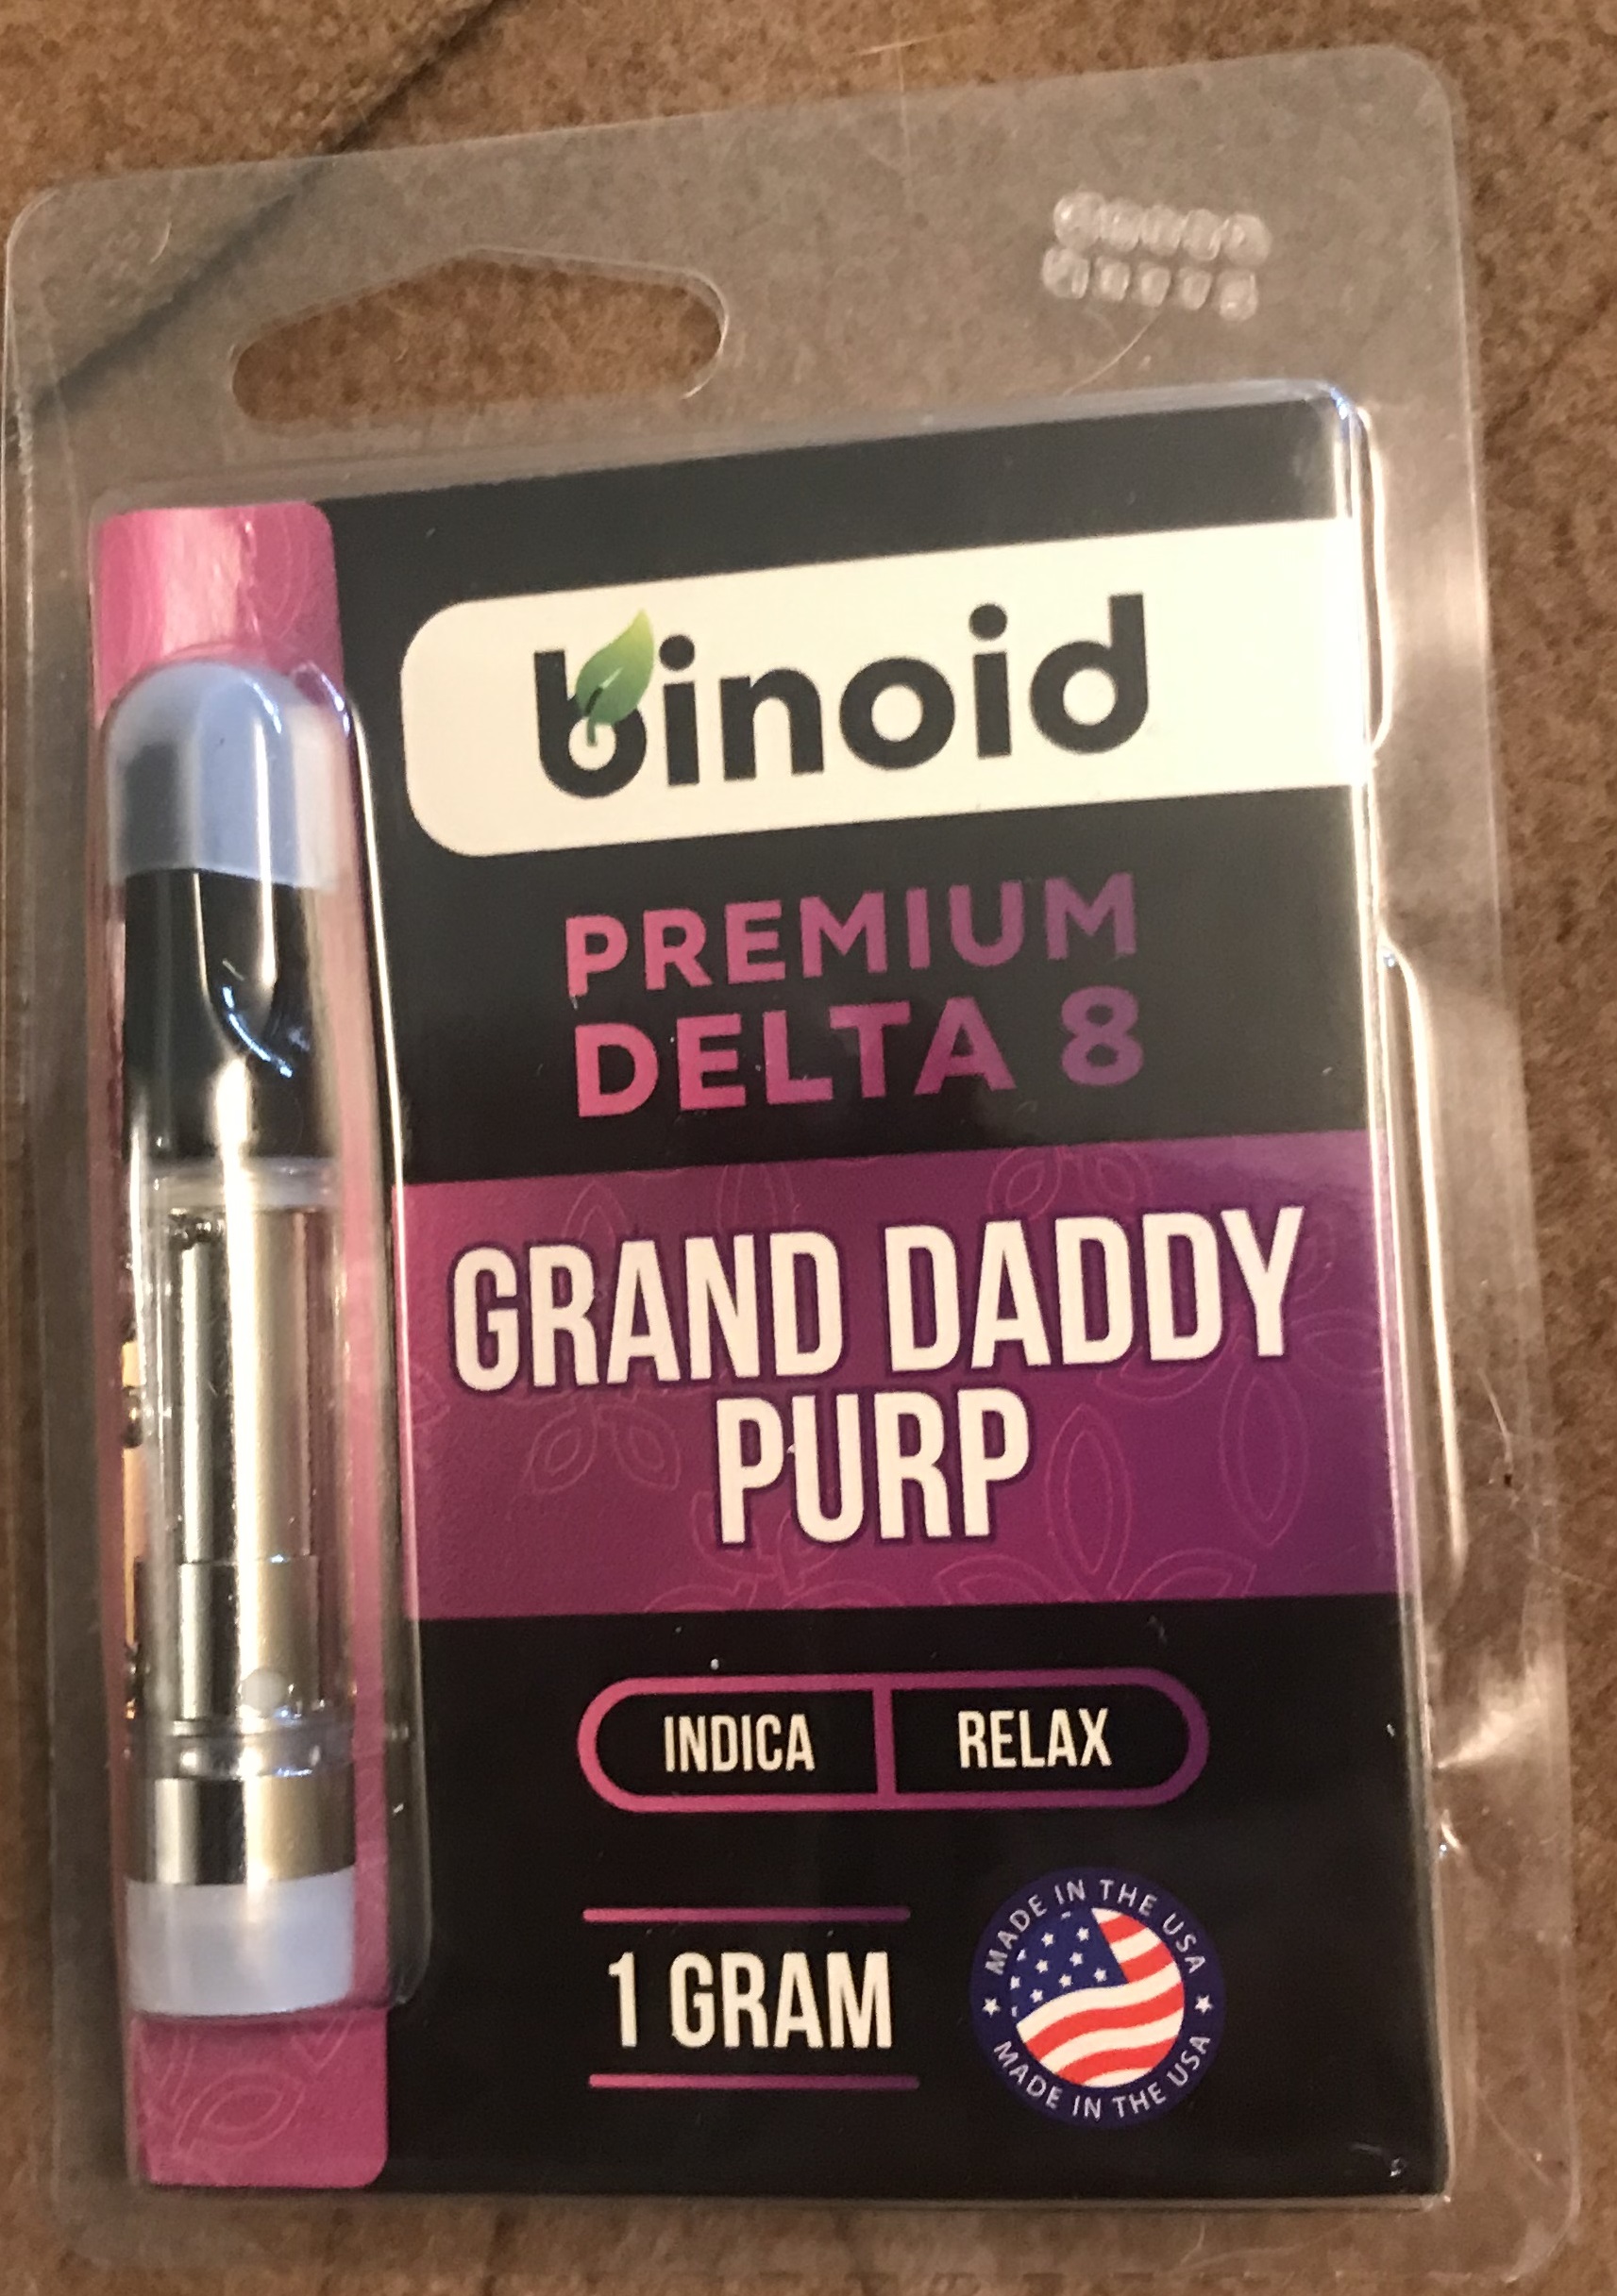 Exhale Delta-8 - Products|Thc|Hemp|Brand|Gummies|Product|Delta-8|Cbd|Origin|Cannabis|Delta|Users|Effects|Cartridges|Brands|Range|List|Research|Usasource|Options|Benefits|Plant|Companies|Vape|Source|Results|Gummy|People|Space|High-Quality|Quality|Place|Overview|Flowers|Lab|Drug|Cannabinoids|Tinctures|Overviewproducts|Cartridge|Delta-8 Thc|Delta-8 Products|Delta-9 Thc|Delta-8 Brands|Usa Source|Delta-8 Thc Products|Cannabis Plant|Federal Level|United States|Delta-8 Gummies|Delta-8 Space|Health Canada|Delta Products|Delta-8 Thc Gummies|Delta-8 Companies|Vape Cartridges|Similar Benefits|Hemp Doctor|Brand Overviewproducts|Drug Test|High-Quality Products|Organic Hemp|San Jose|Editorial Team|Farm Bill|Overview Products|Wide Range|Psychoactive Properties|Reliable Provider|Boston Hempire